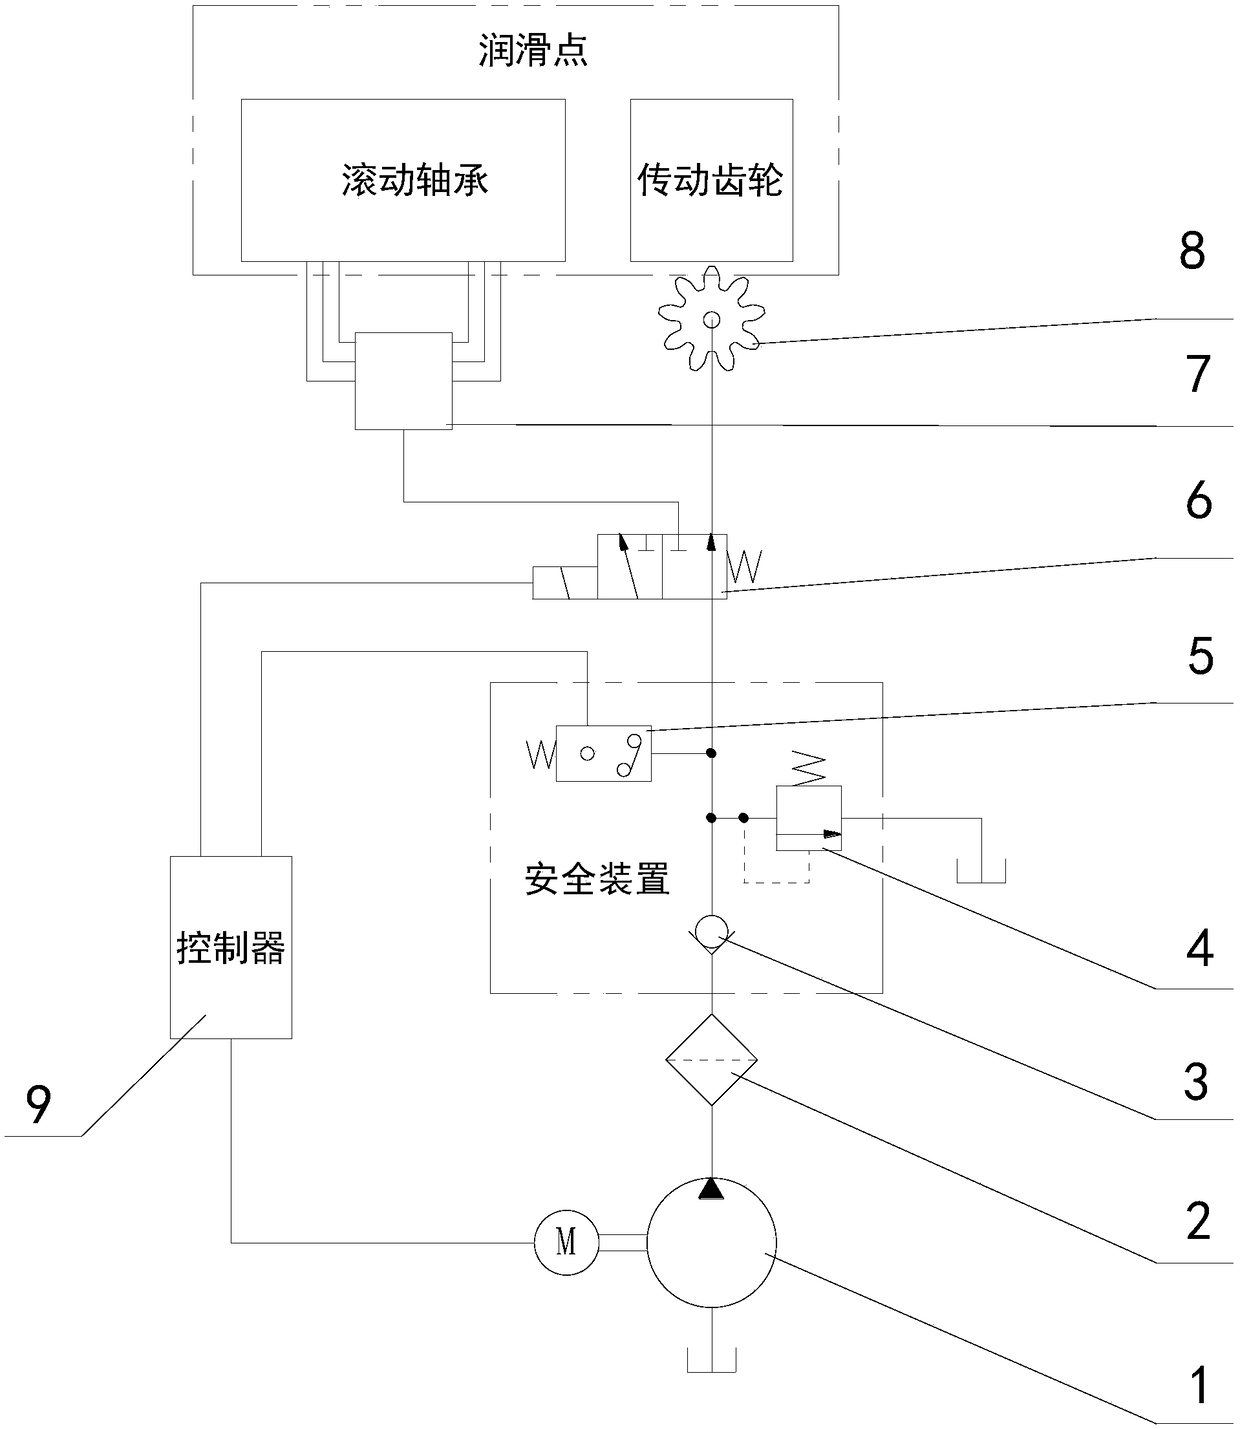 Dynamic compaction machine automatic lubricating system and control method thereof